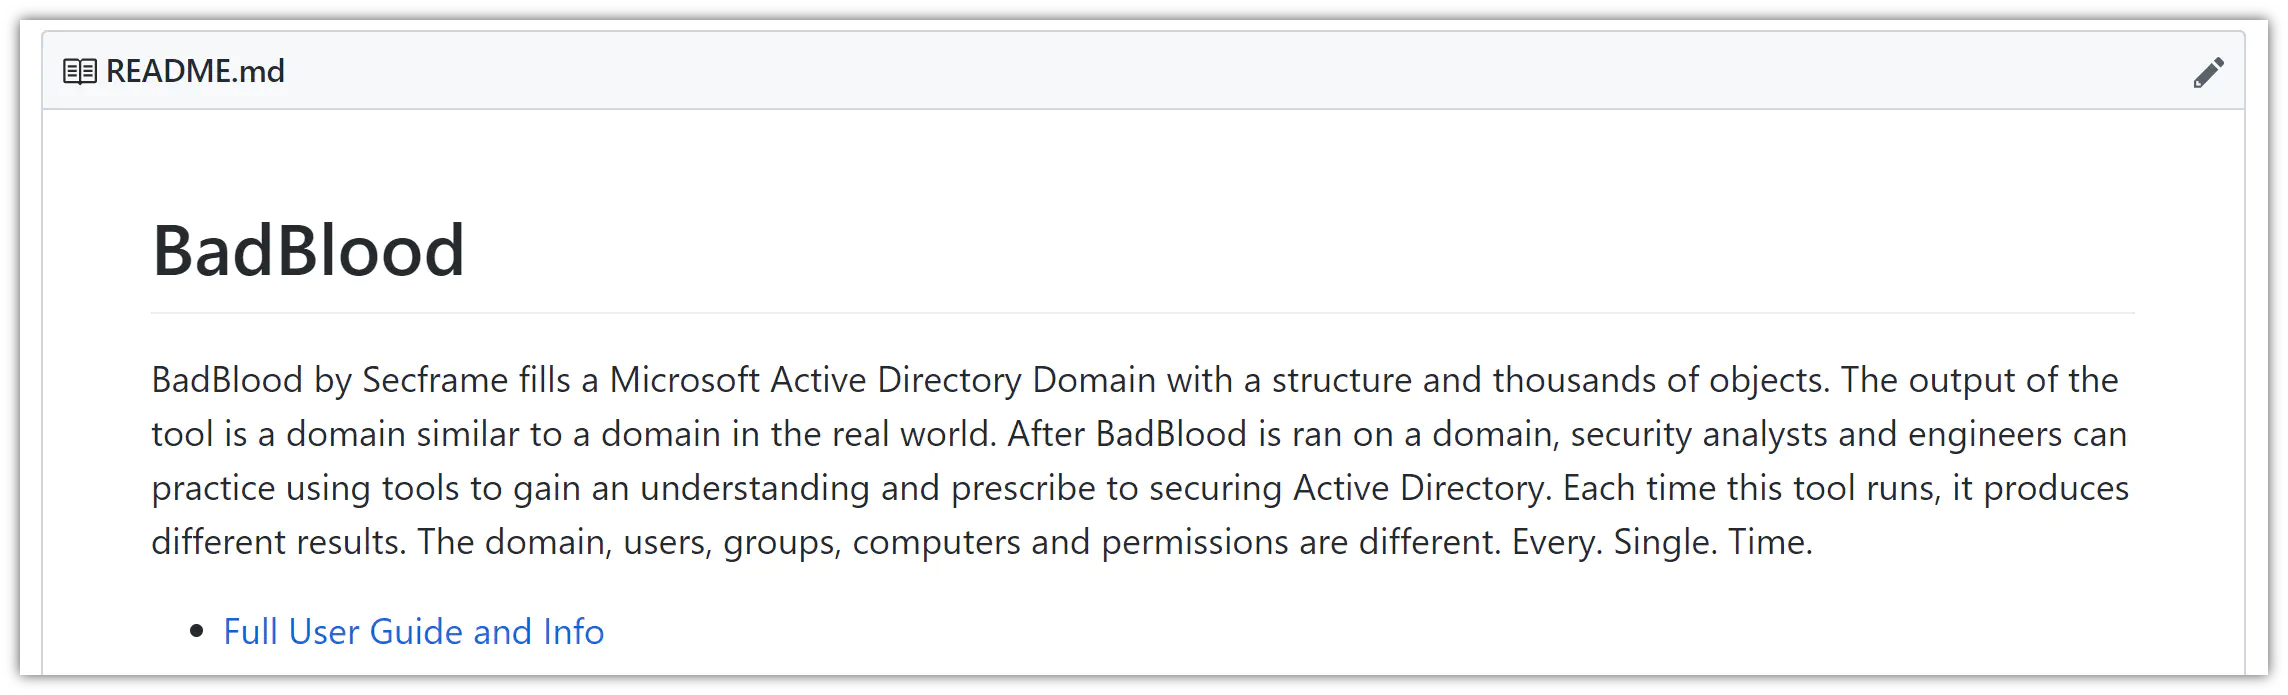 badblood by secframe fills an active directory with objects